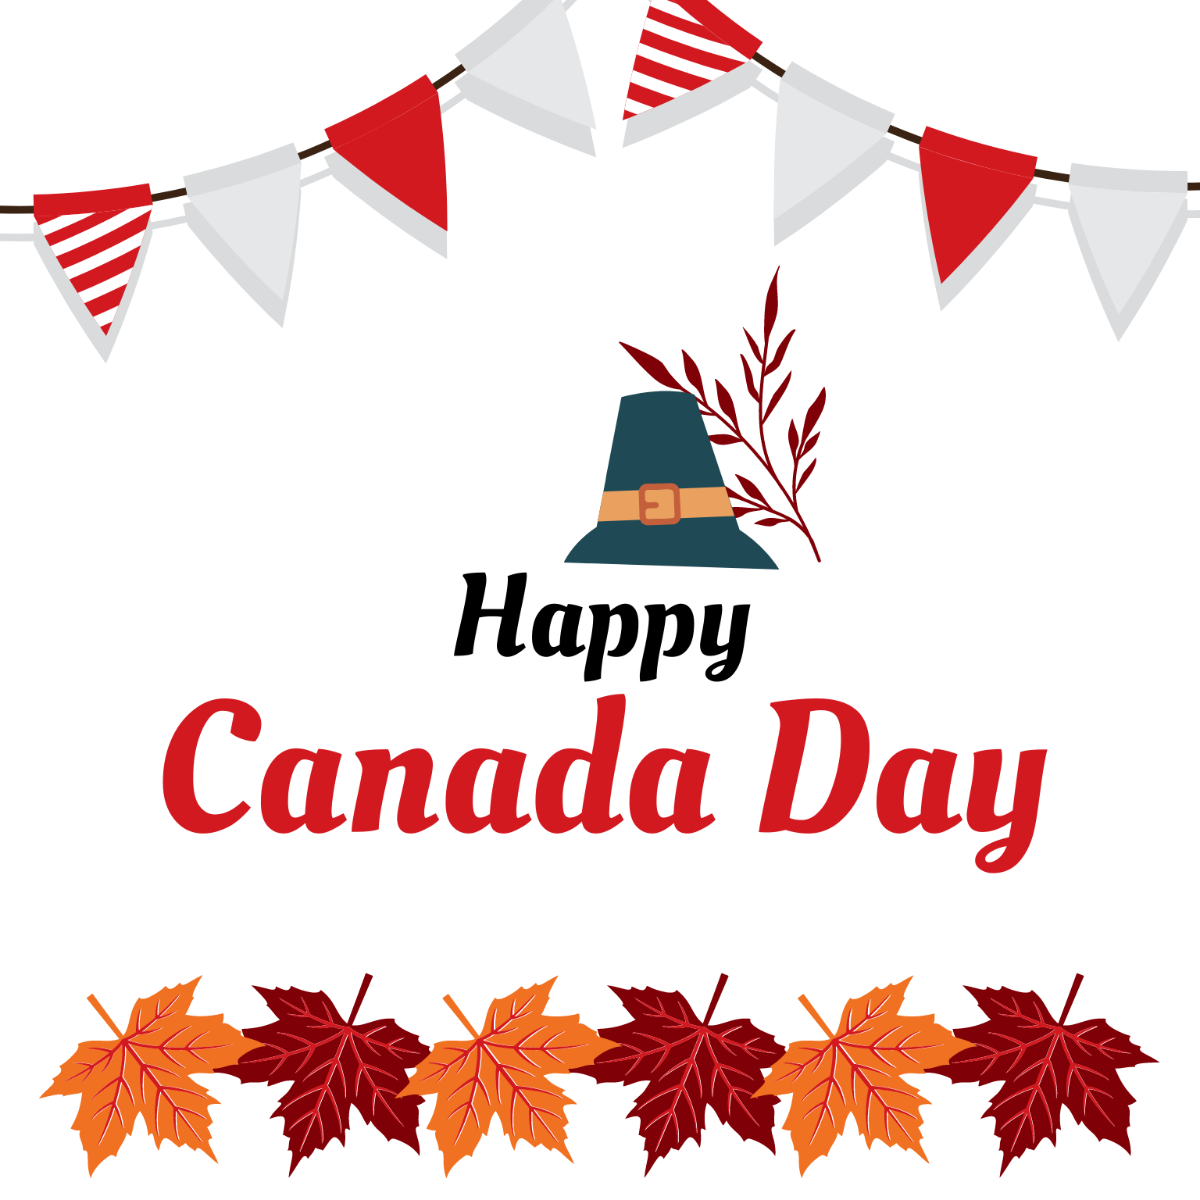 Happy Canada Day Illustration Template